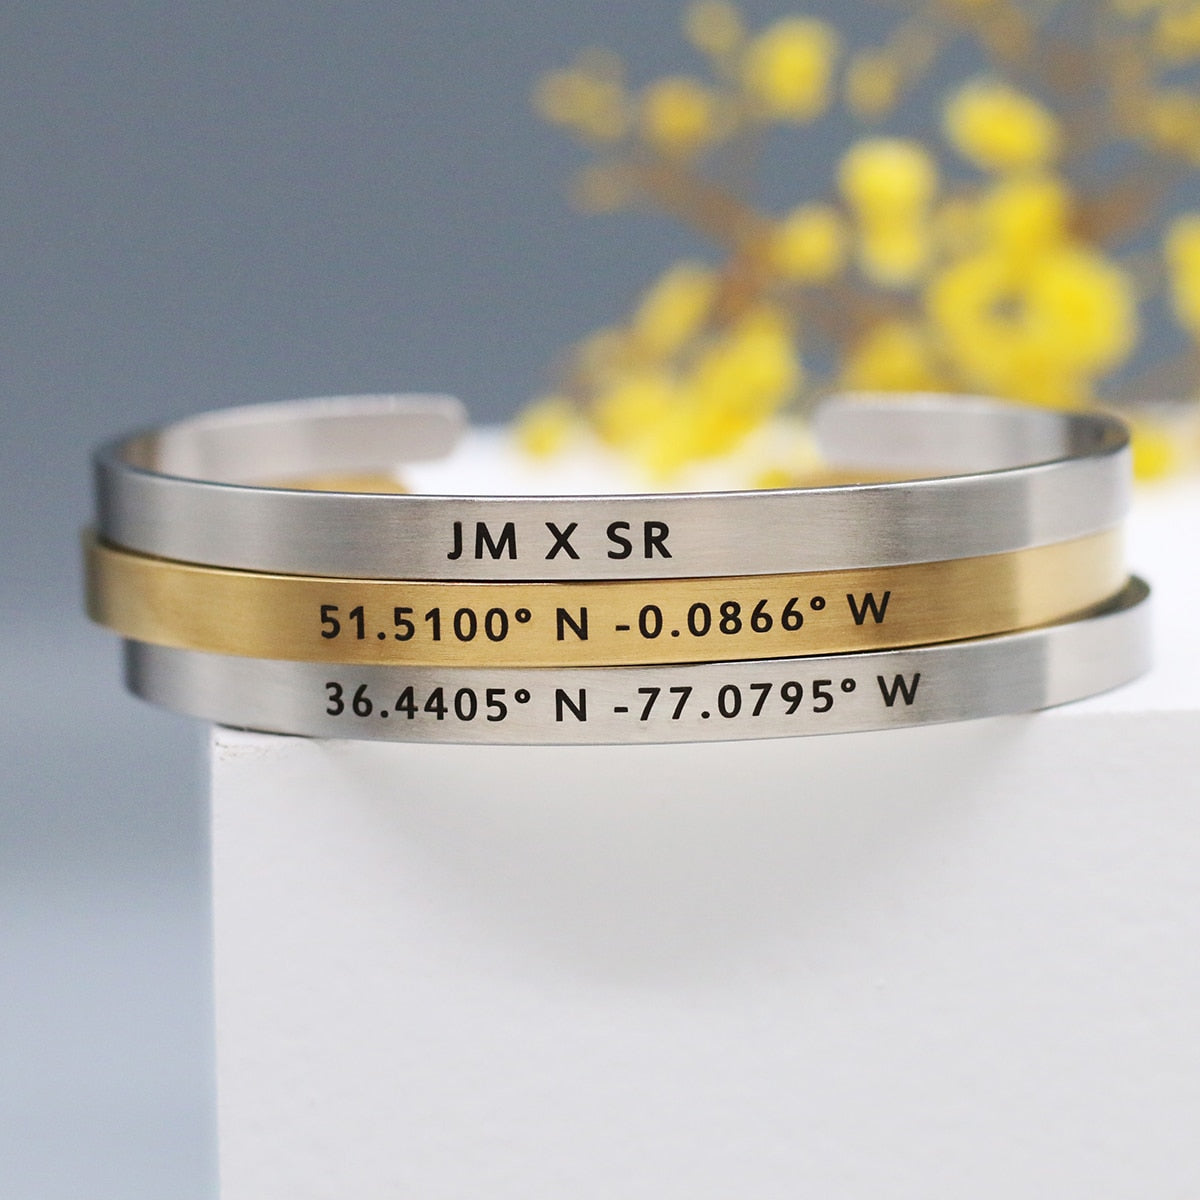 Personalized 5mm Brushed Stainless Steel Custom Cuff Coordinate Bracelet Jewelry Gift For Man and Women